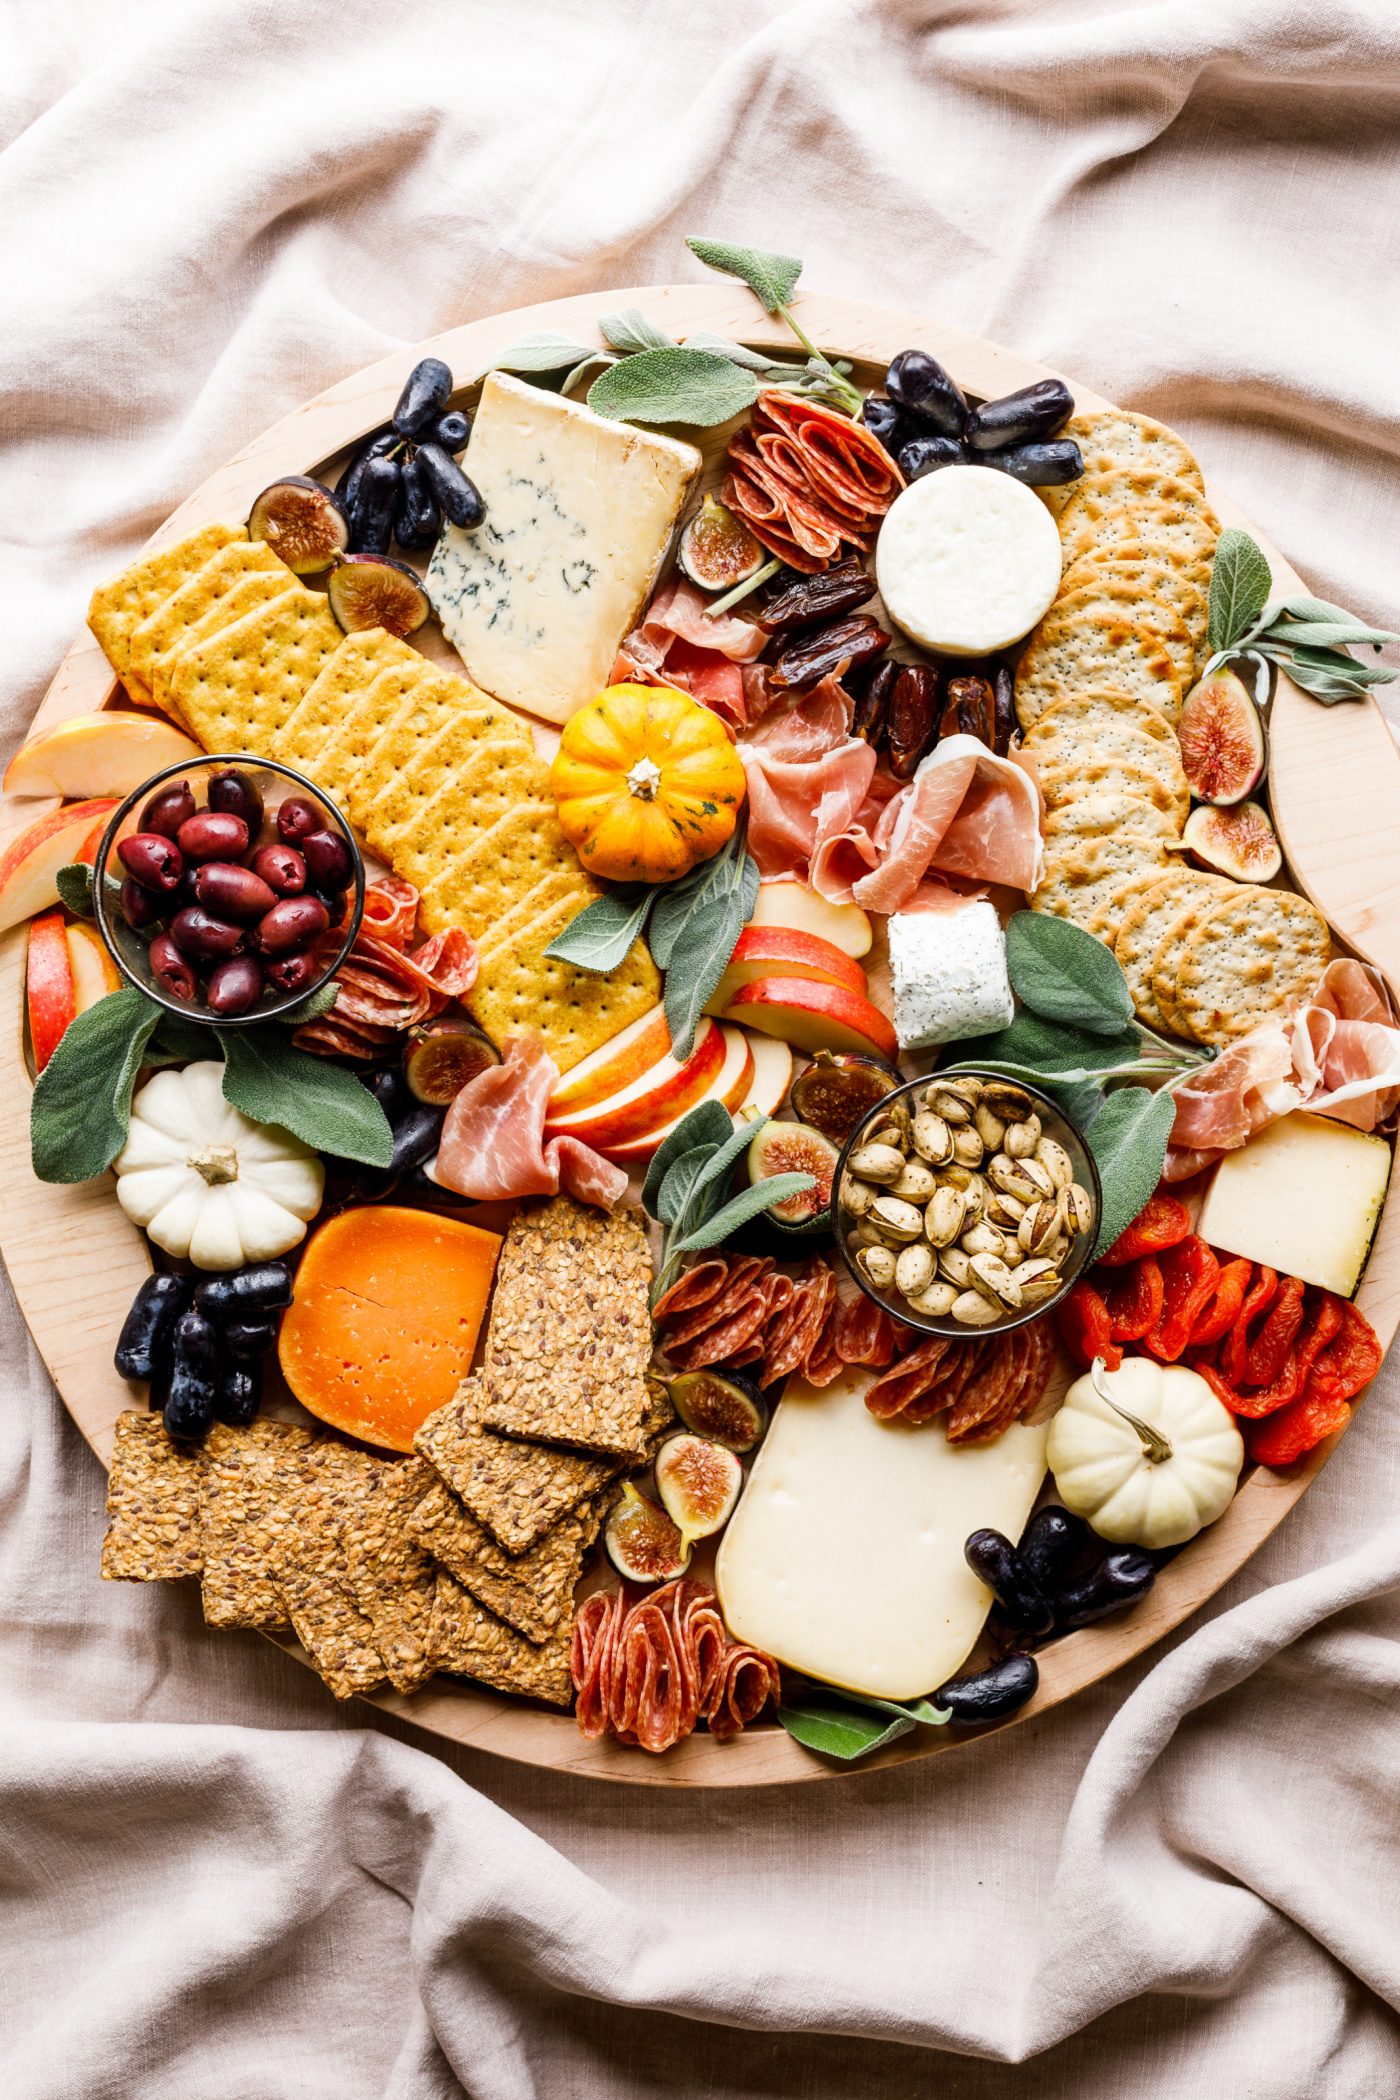 How to Make an Epic Charcuterie Board for Any Occasion